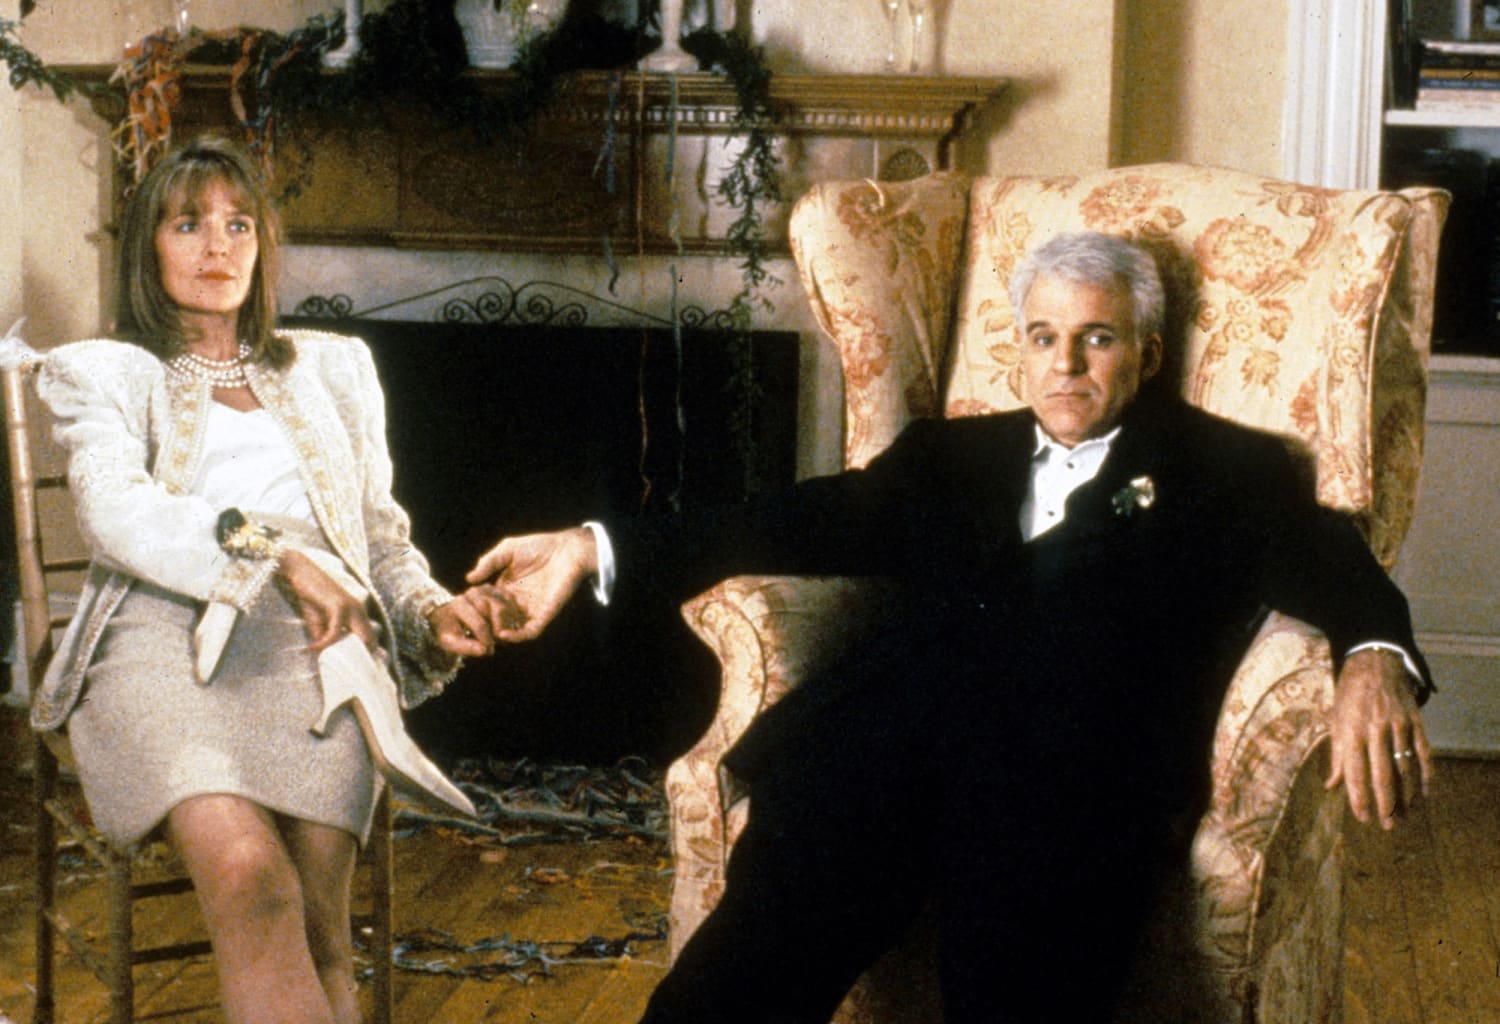 Father of the Bride 2022 on HBO Max vs. 1991 vs. 1950: how the